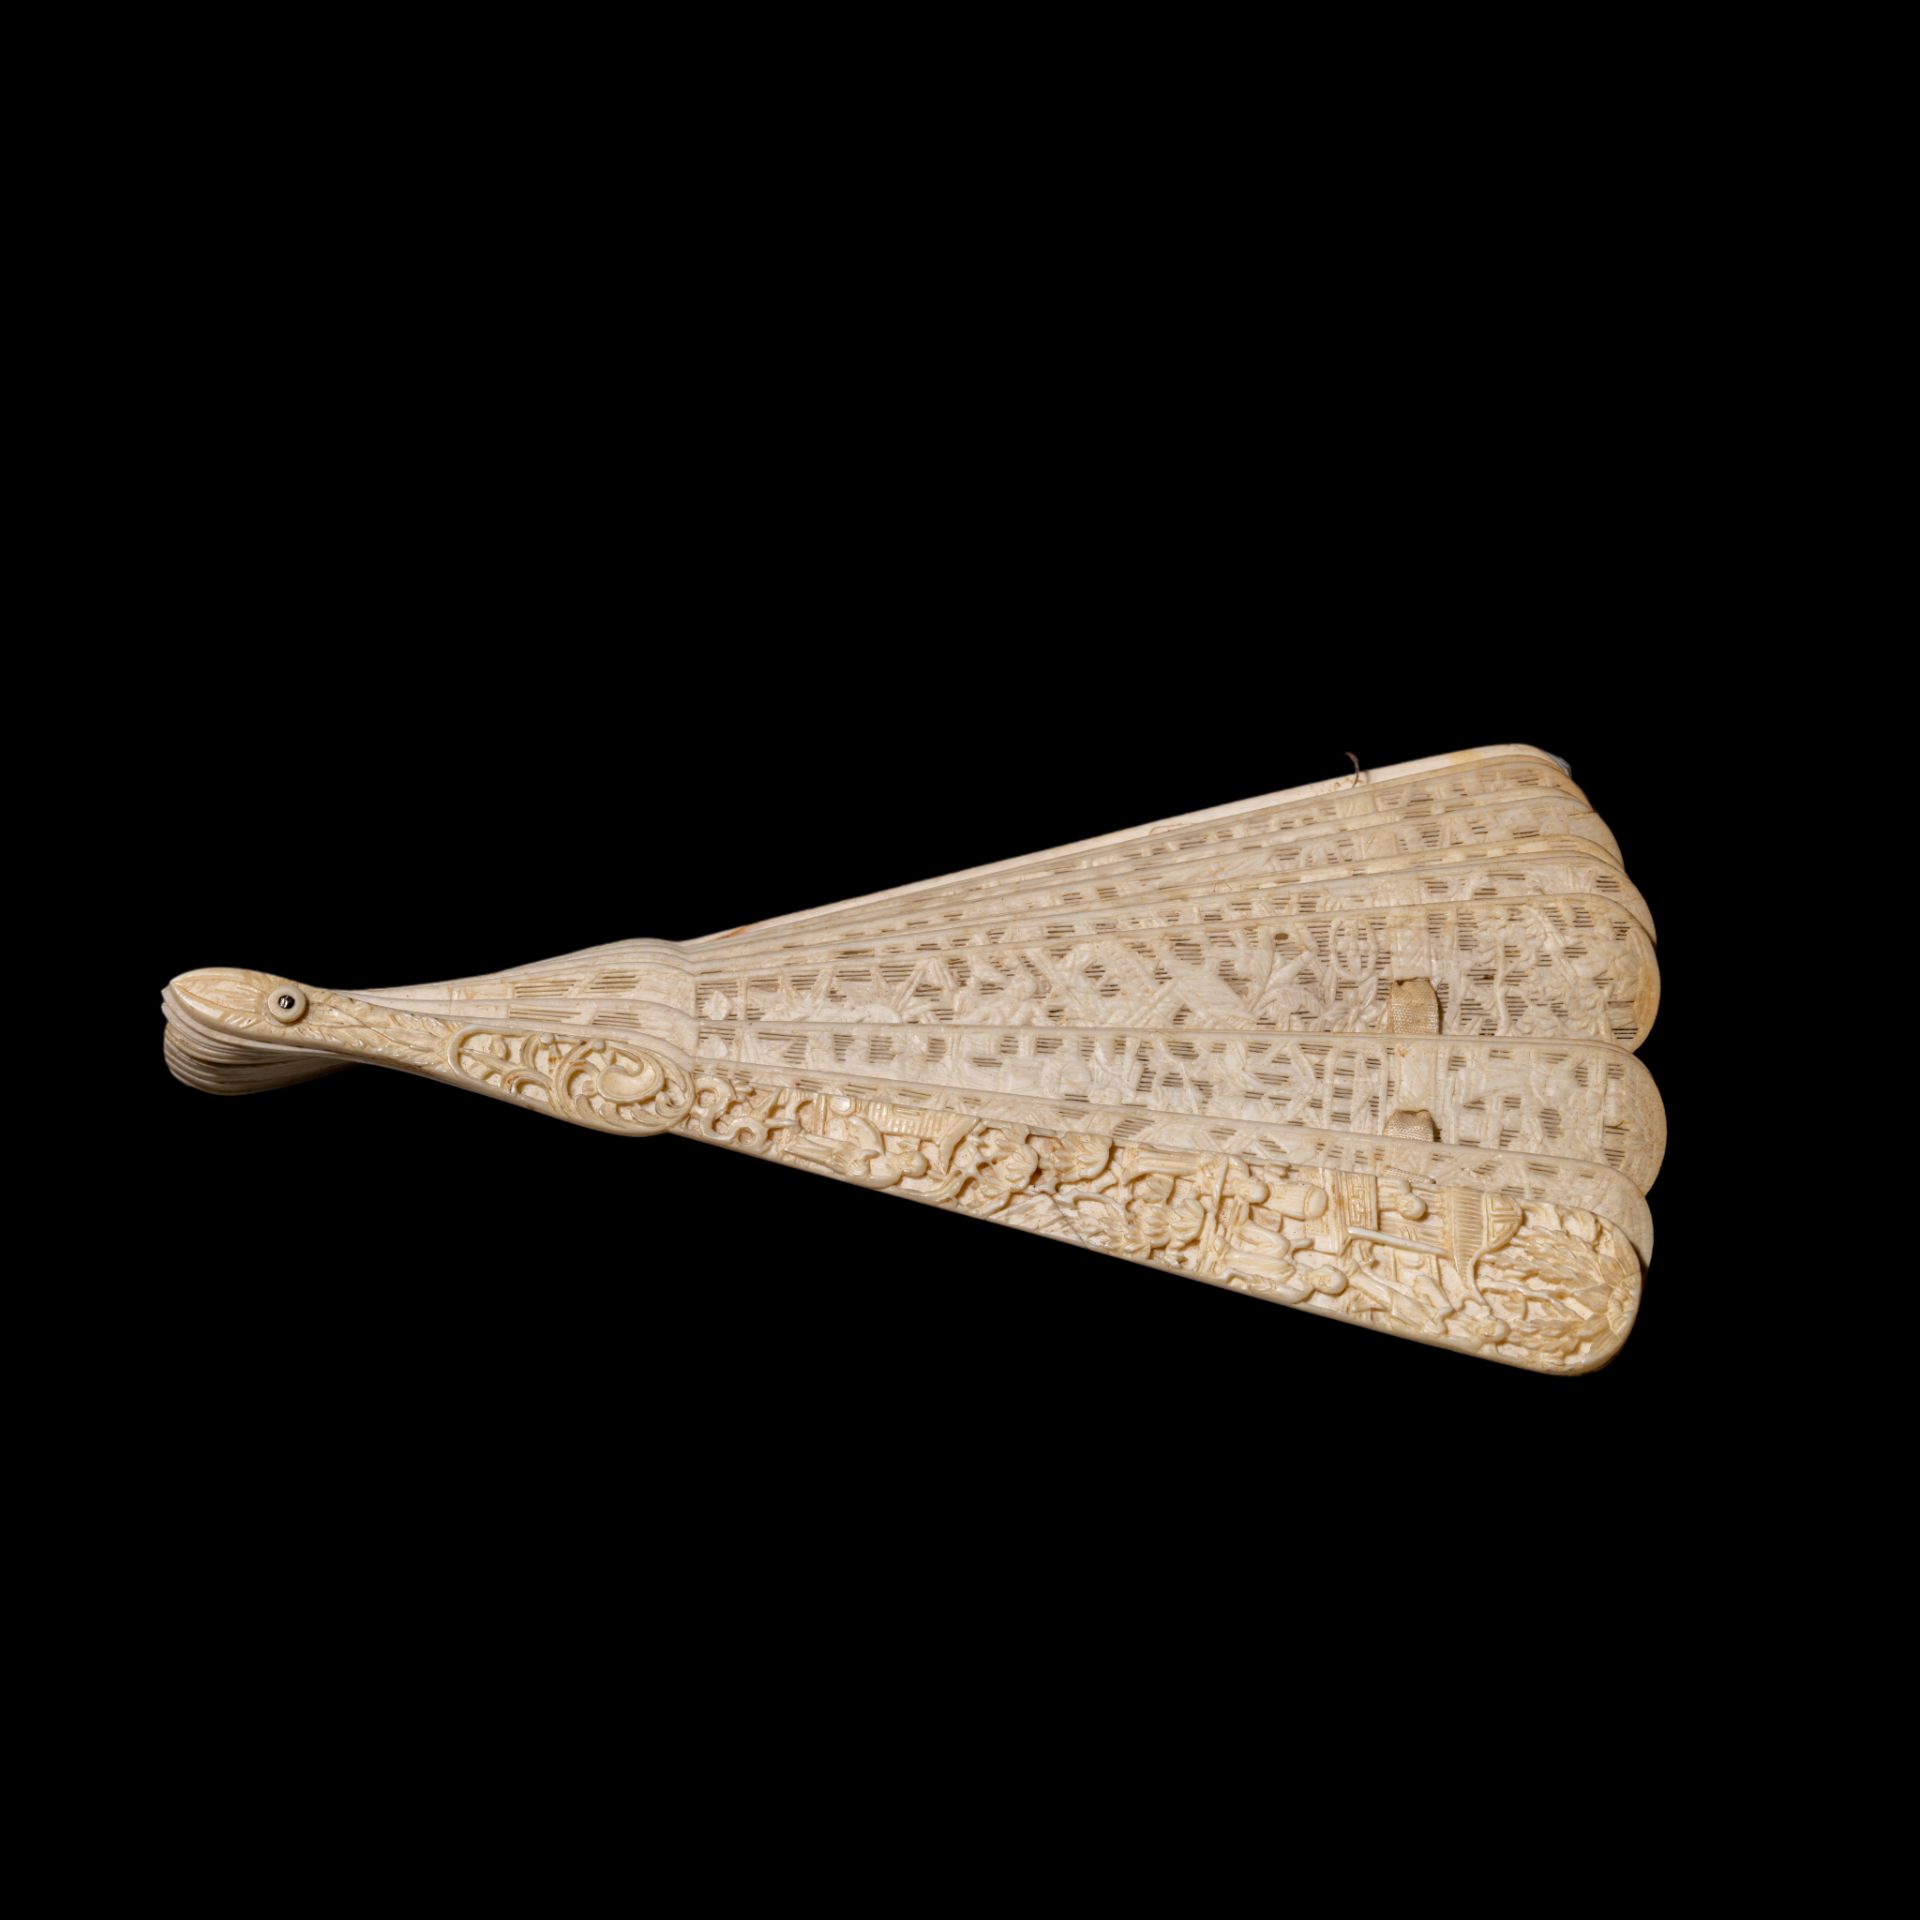 Three Chinese late Qing / early Republic ivory fans, H 16,4 - 19,4 - 20,3 cm / 39 - 77 - 54 g. - W f - Bild 6 aus 12